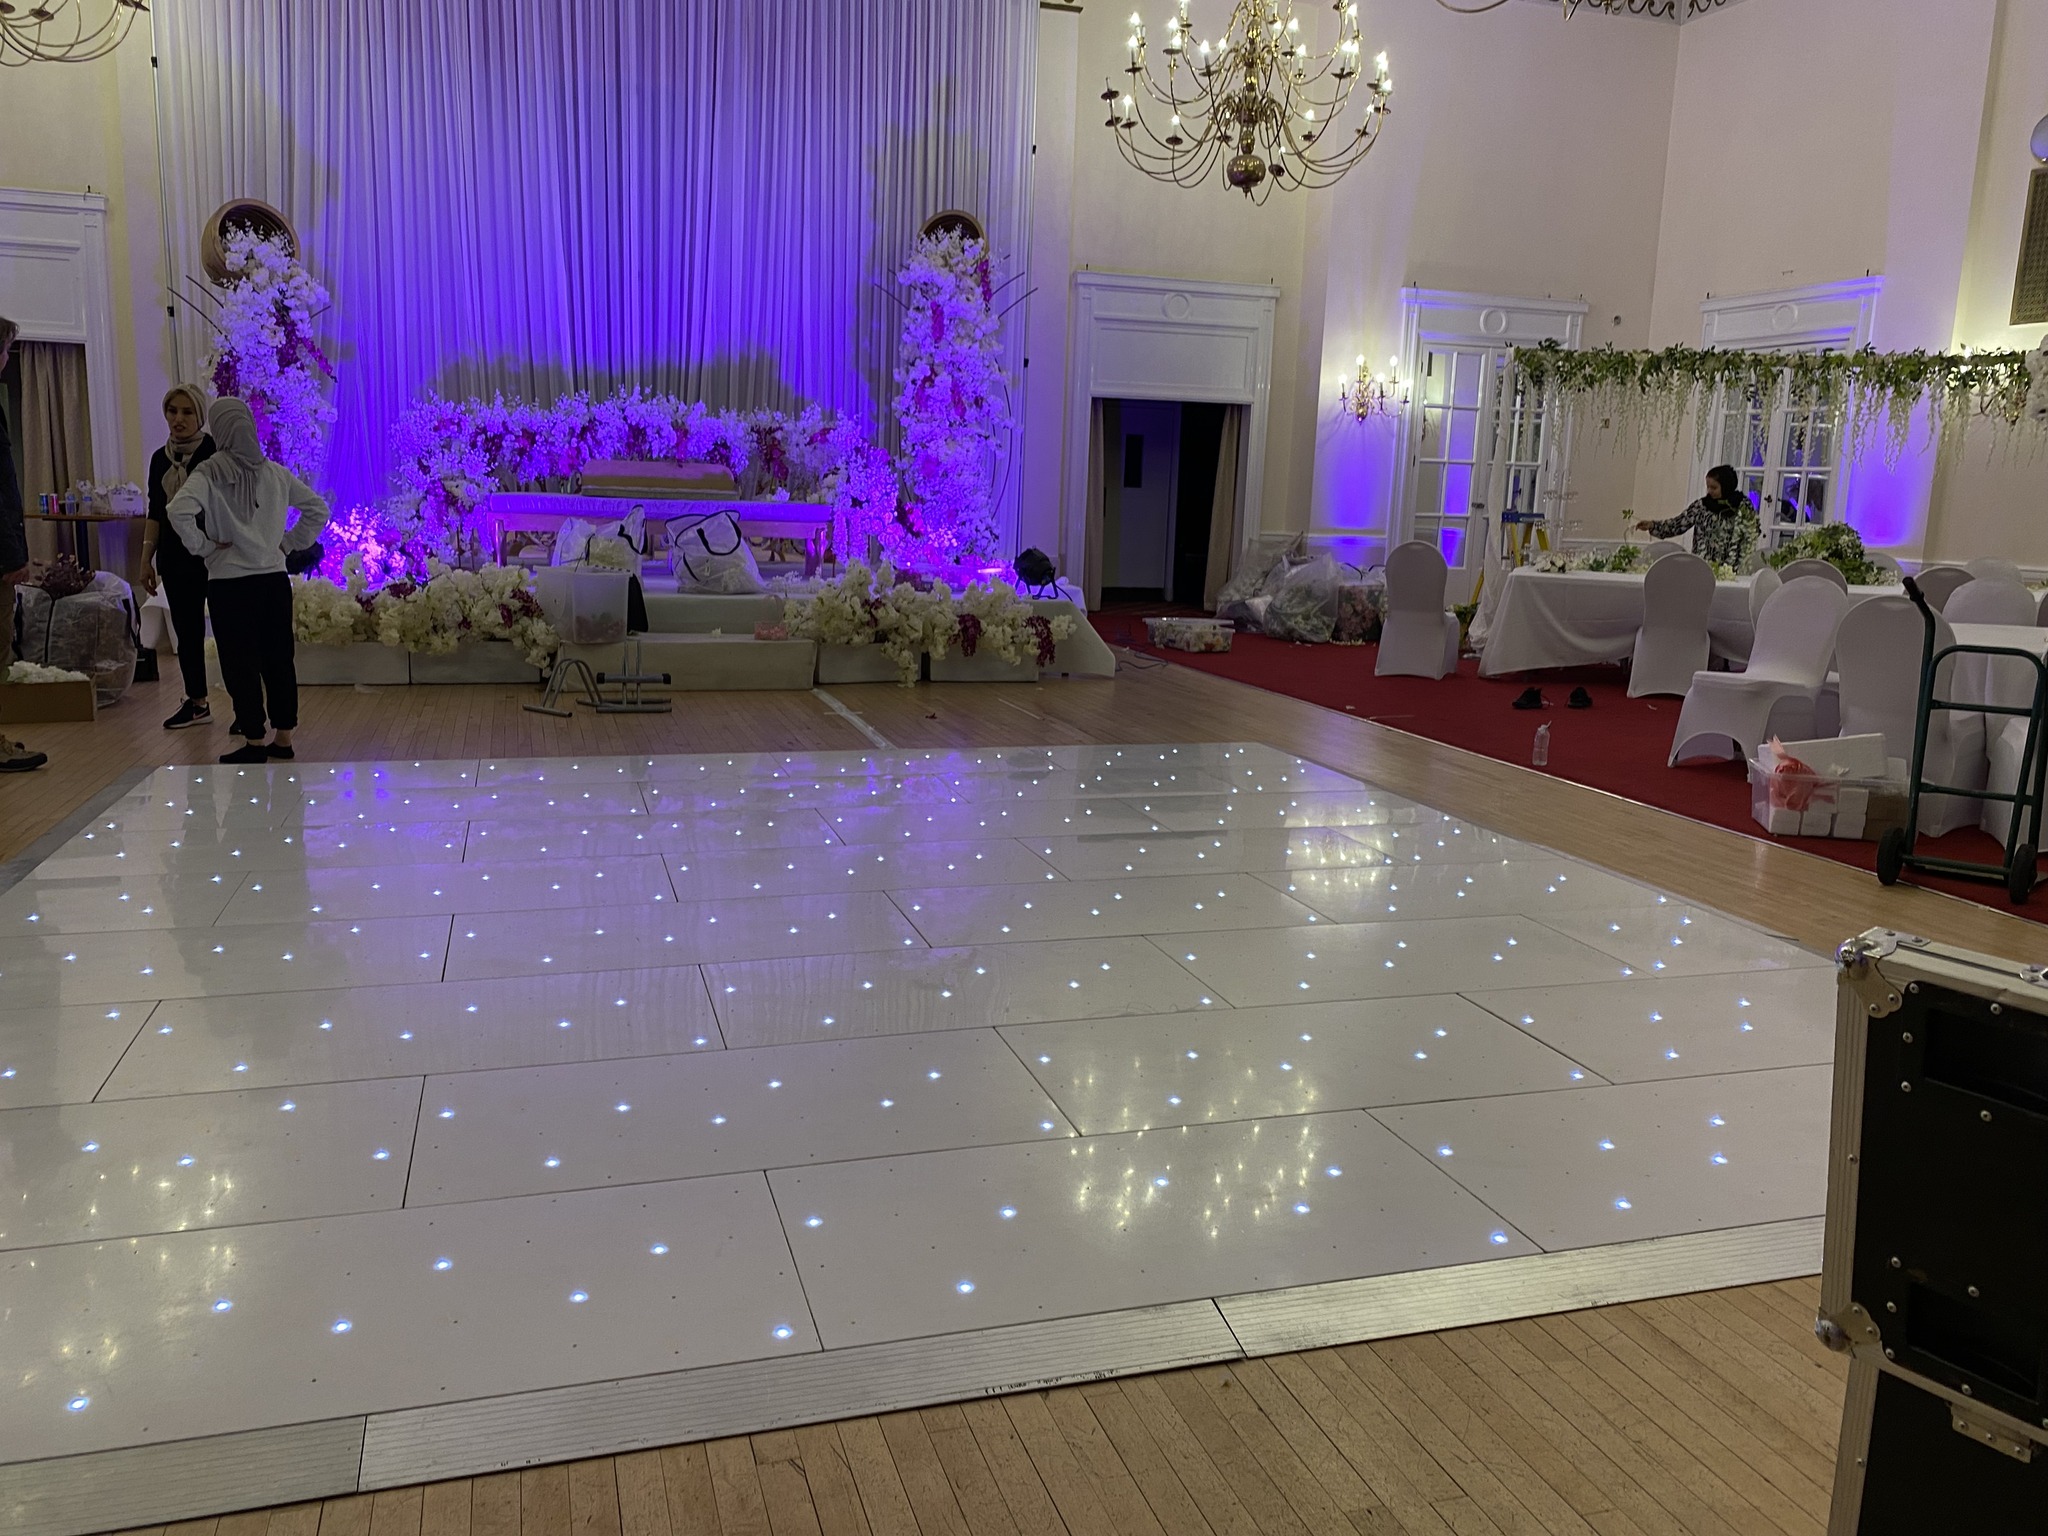 Main image for Dance Floor Hire